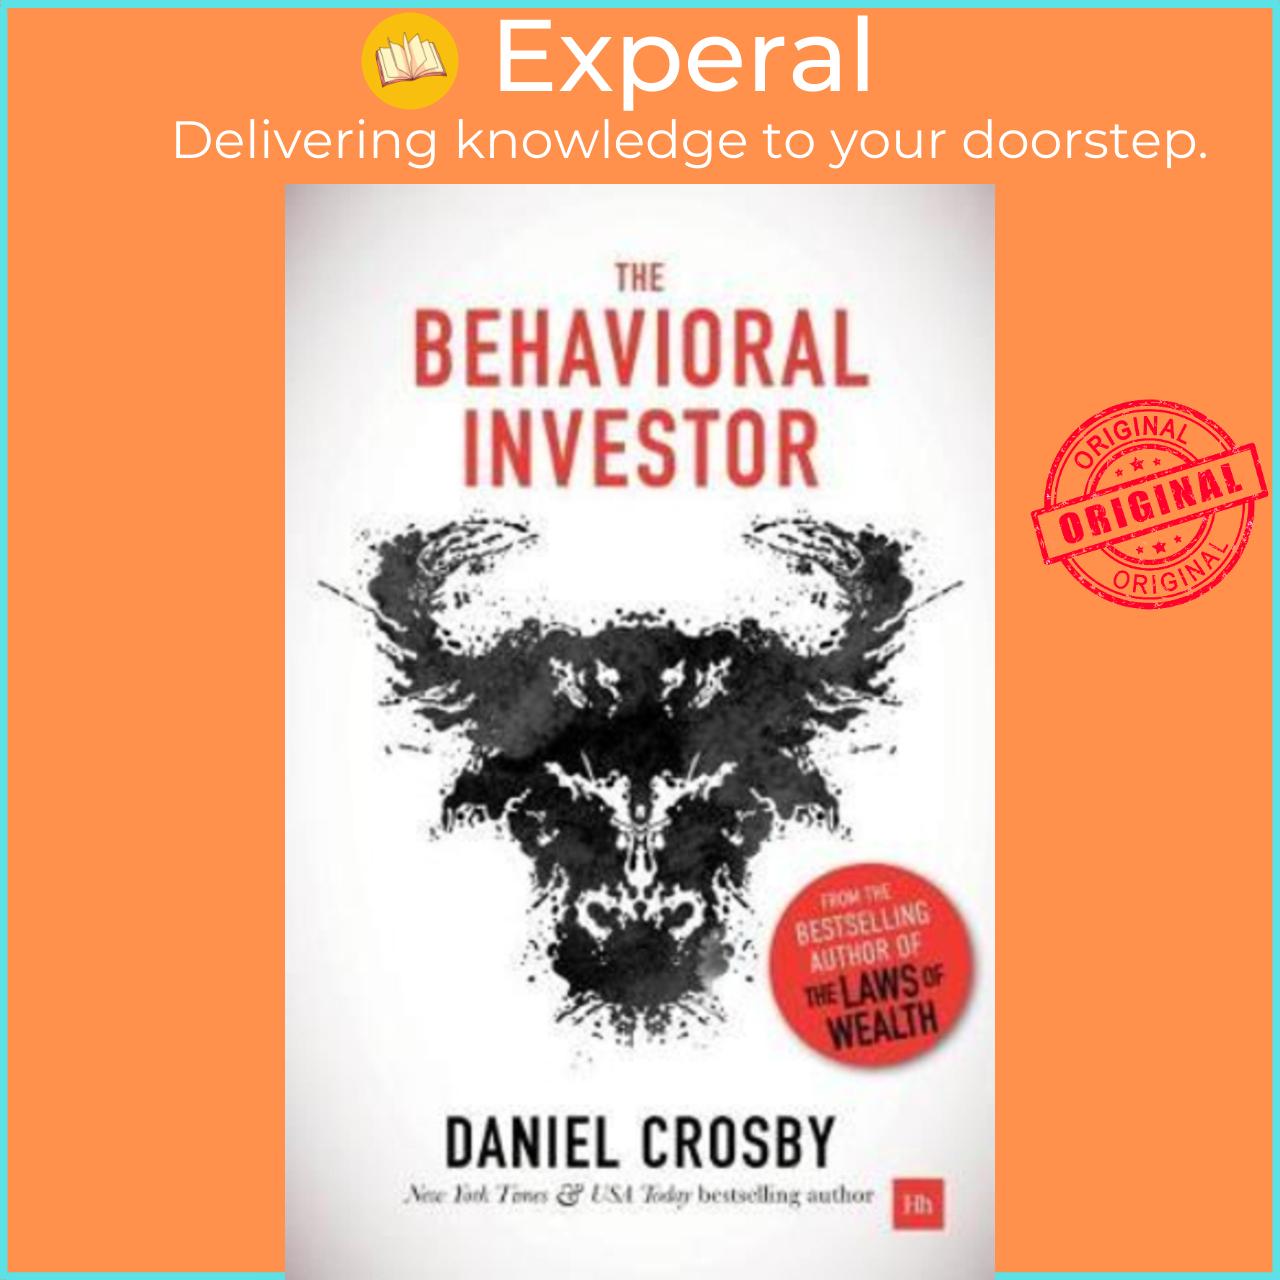 Sách - The Behavioral Investor by Daniel Crosby (UK edition, hardcover)